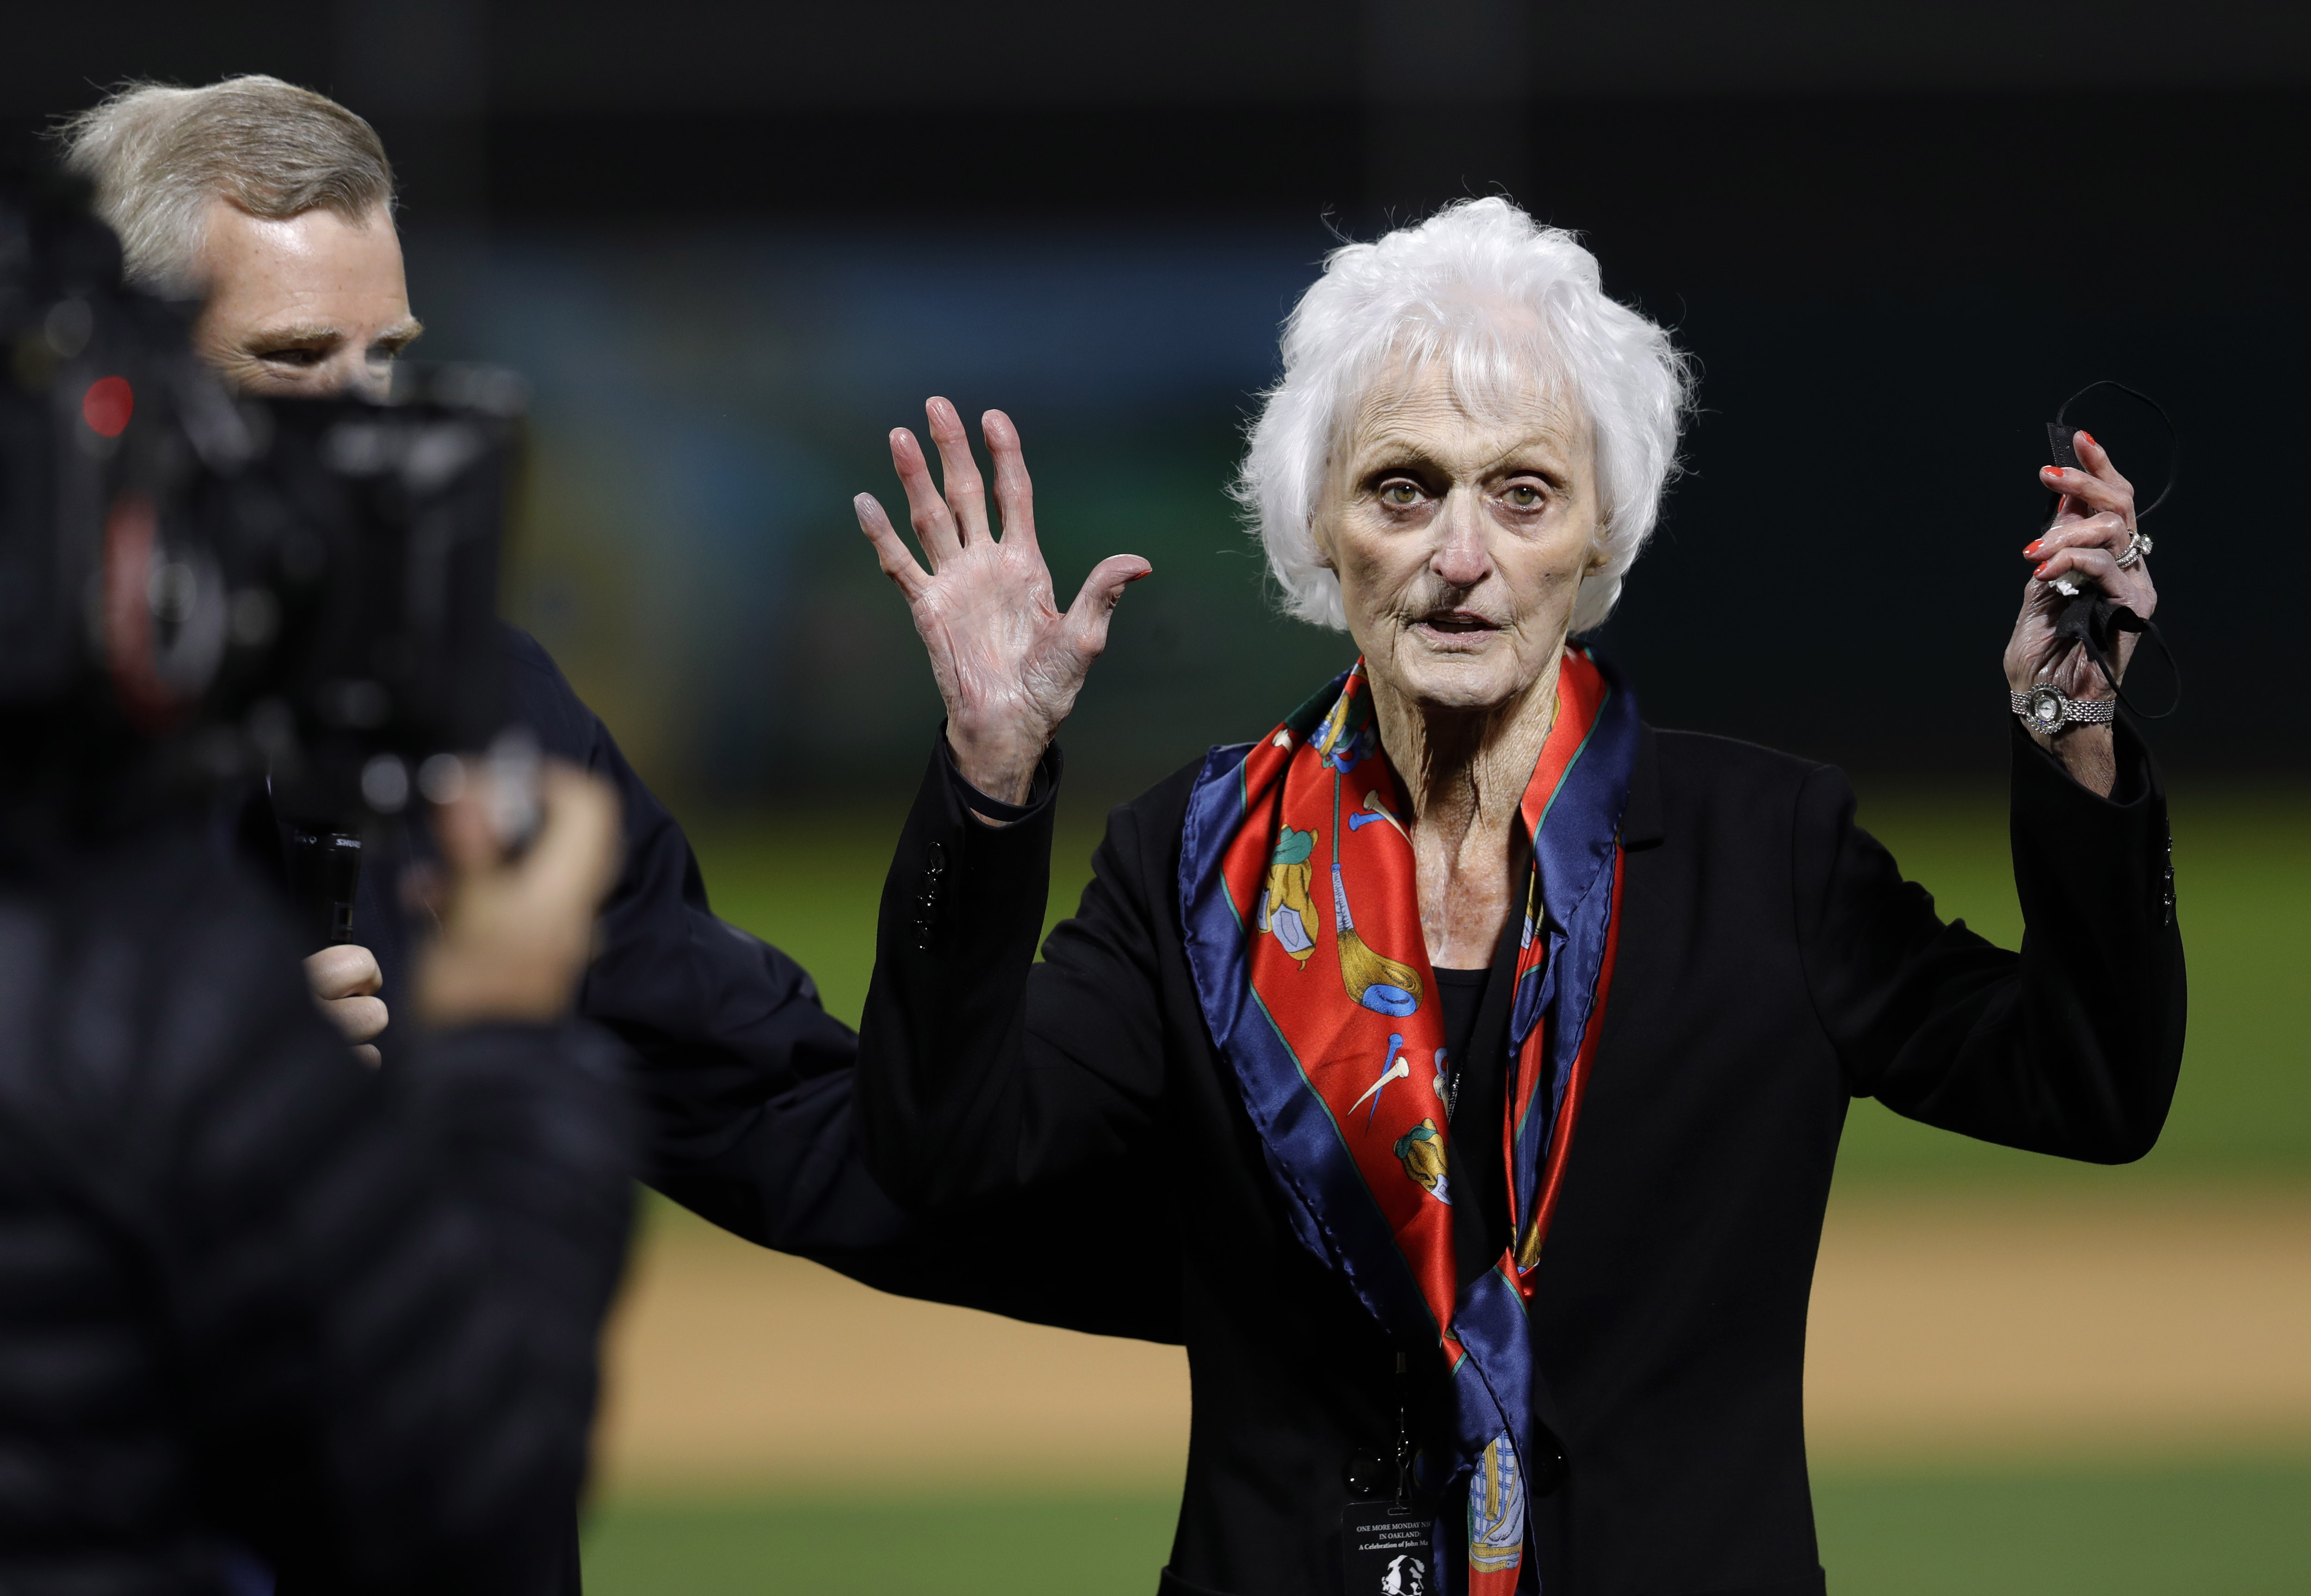 Virginia Madden at the Celebration of John Madden memorial event at the Coliseum on February 14, 2022, in Oakland, California. | Source: Getty Images